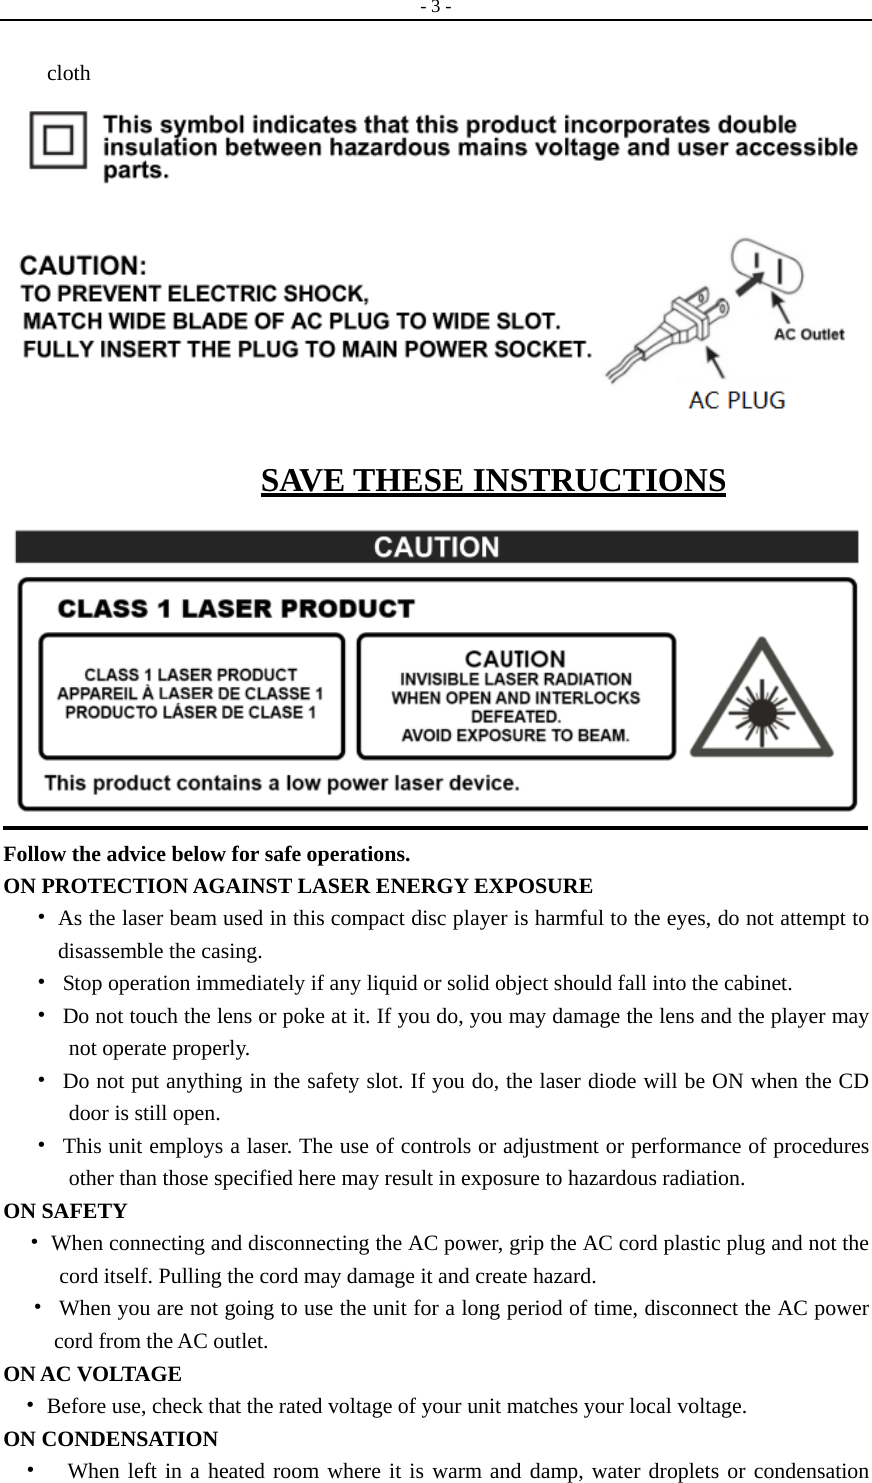   - 3 -   cloth  SAVE THESE INSTRUCTIONS  Follow the advice below for safe operations. ON PROTECTION AGAINST LASER ENERGY EXPOSURE •  As the laser beam used in this compact disc player is harmful to the eyes, do not attempt to disassemble the casing. • Stop operation immediately if any liquid or solid object should fall into the cabinet. • Do not touch the lens or poke at it. If you do, you may damage the lens and the player may not operate properly. • Do not put anything in the safety slot. If you do, the laser diode will be ON when the CD door is still open. • This unit employs a laser. The use of controls or adjustment or performance of procedures other than those specified here may result in exposure to hazardous radiation. ON SAFETY    •  When connecting and disconnecting the AC power, grip the AC cord plastic plug and not the cord itself. Pulling the cord may damage it and create hazard. • When you are not going to use the unit for a long period of time, disconnect the AC power cord from the AC outlet. ON AC VOLTAGE •  Before use, check that the rated voltage of your unit matches your local voltage. ON CONDENSATION •  When left in a heated room where it is warm and damp, water droplets or condensation 